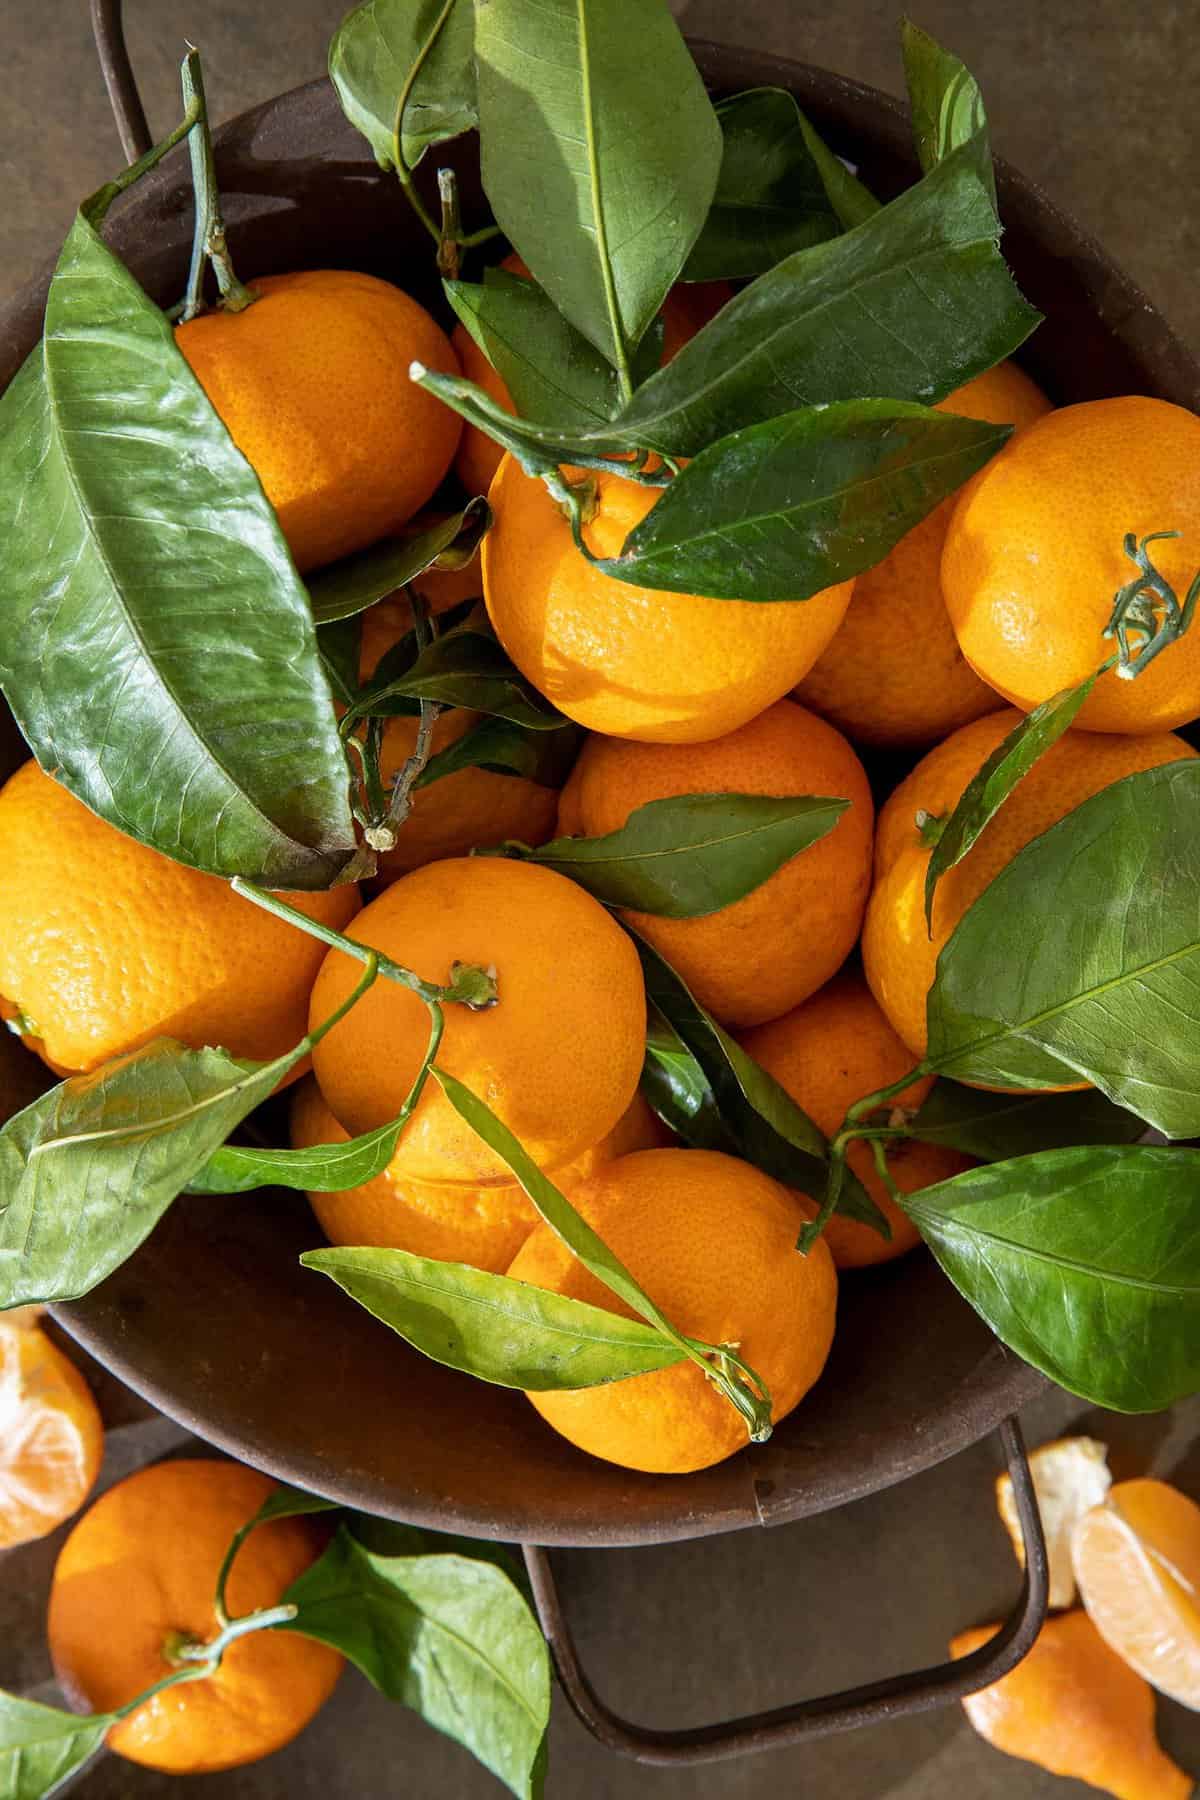 Clementines, Satsumas and Tangerines